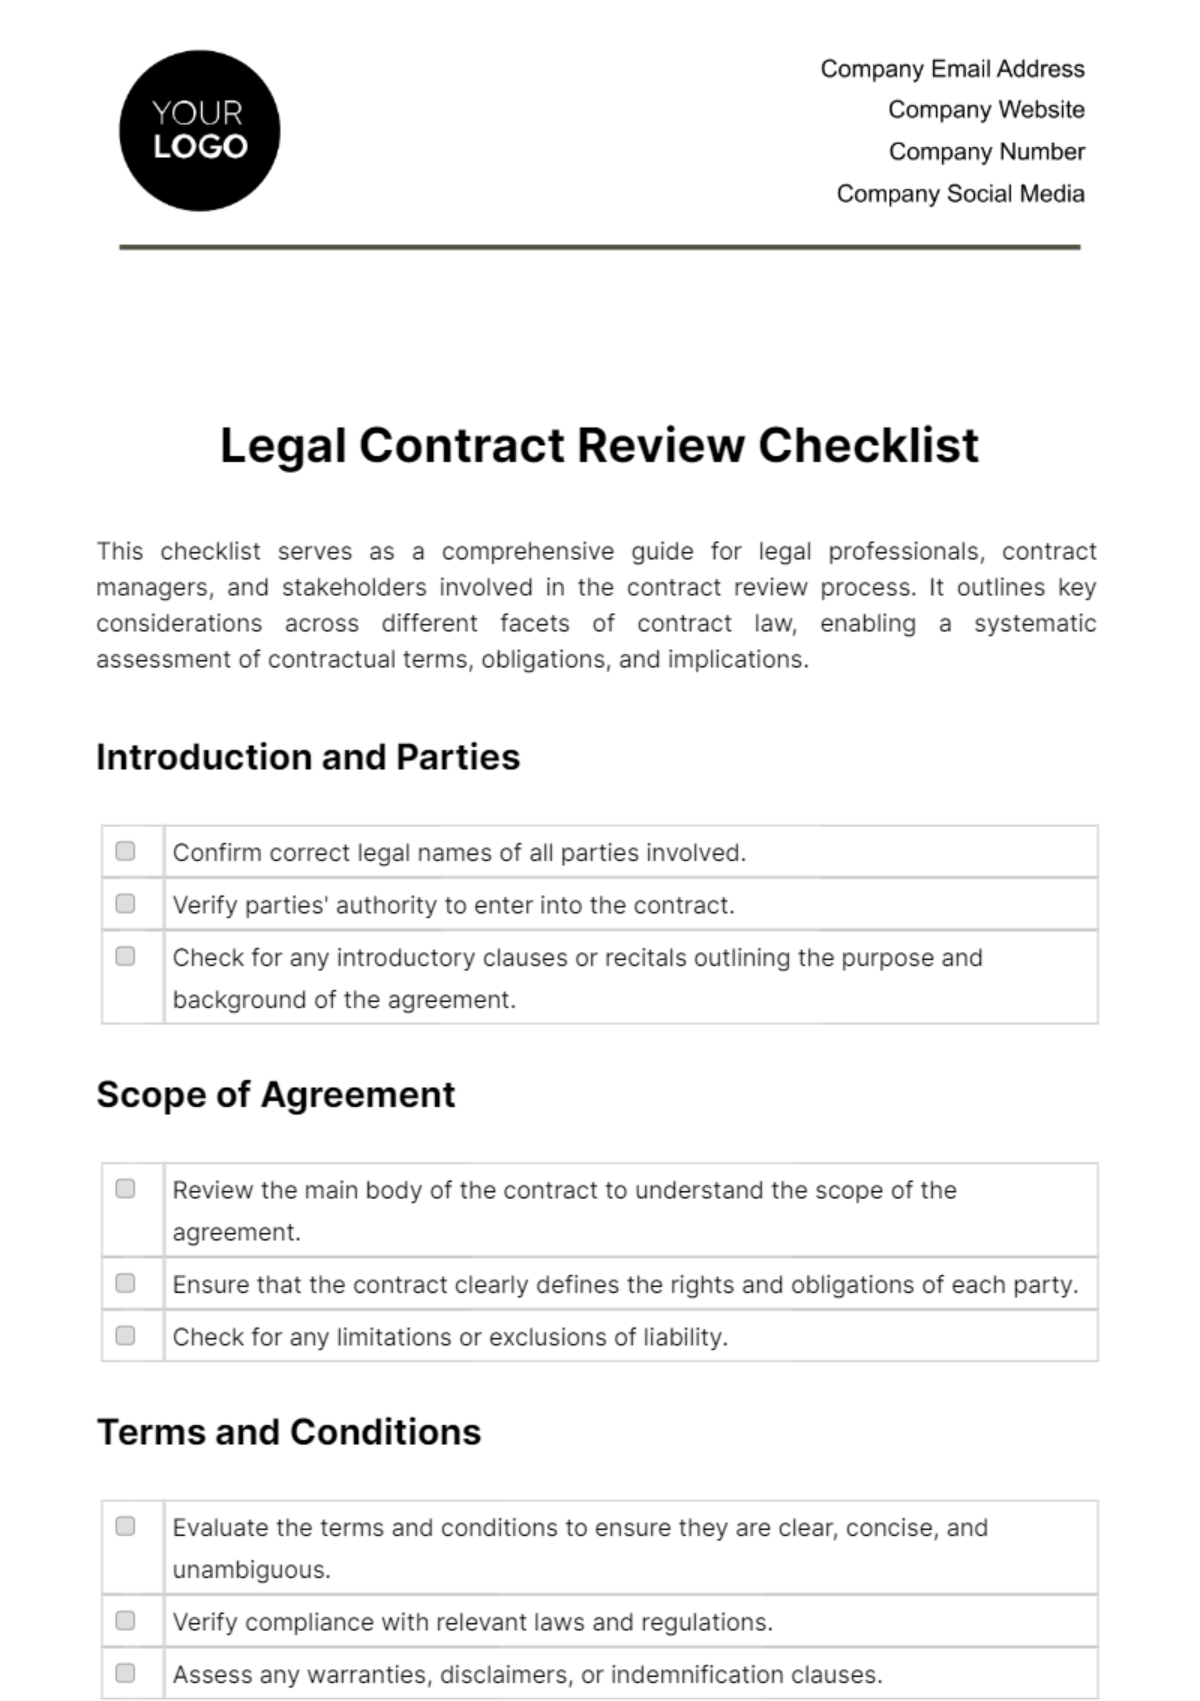 Legal Contract Review Checklist Template